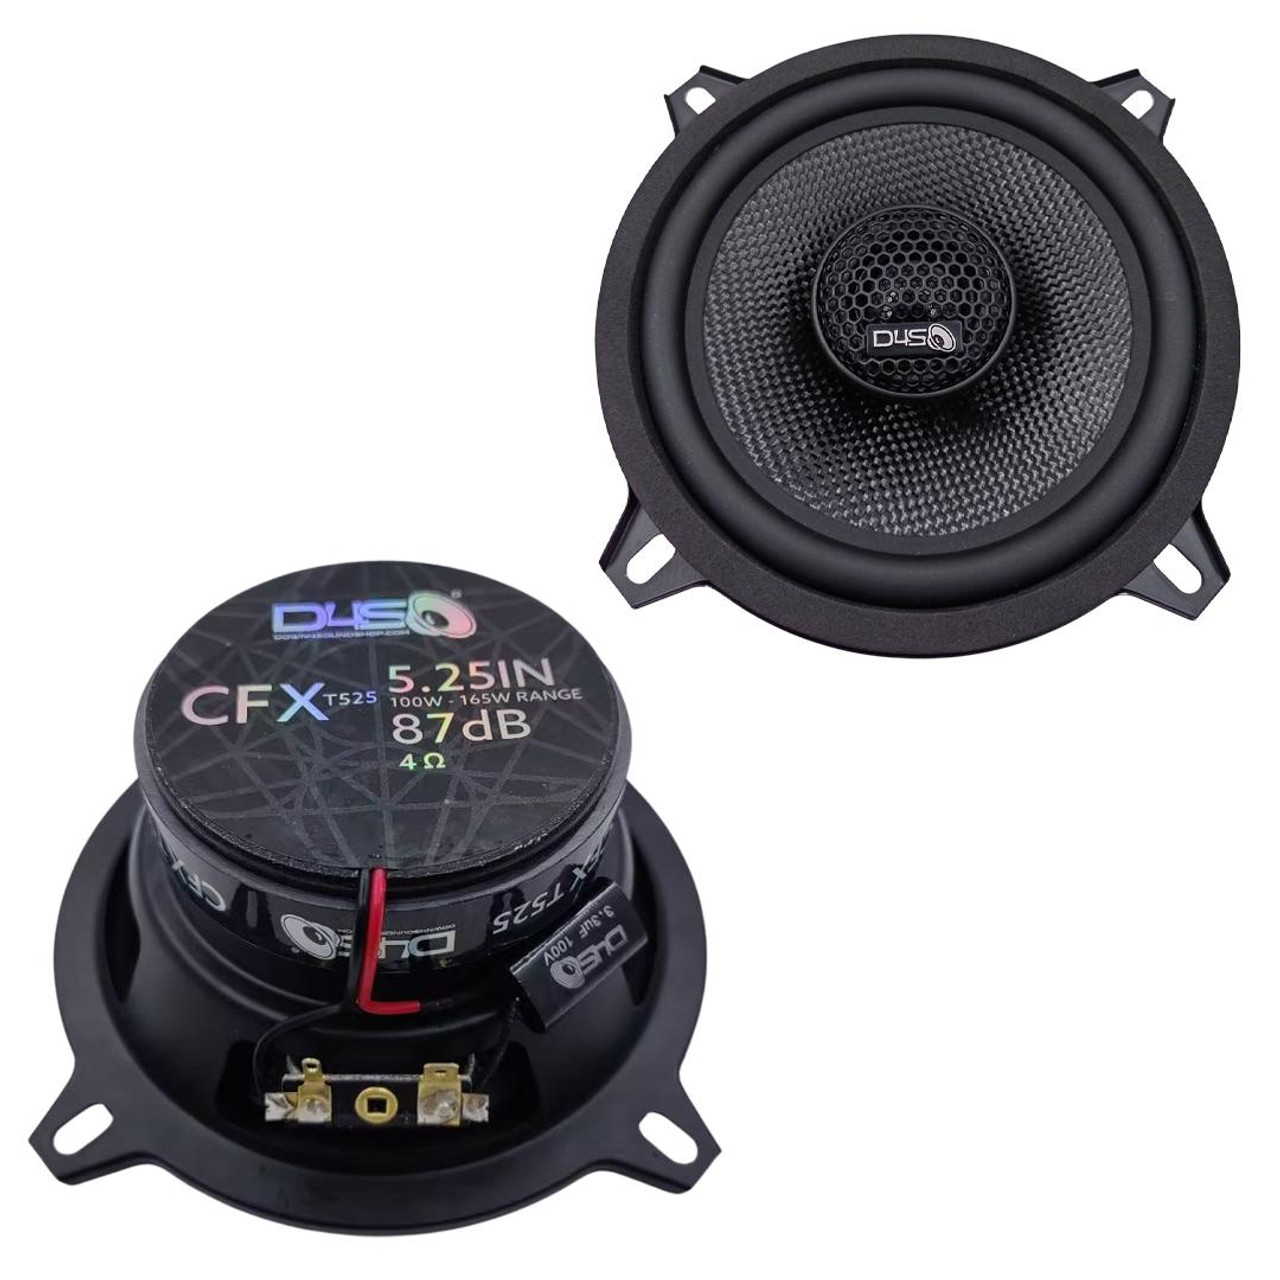 DOWN4SOUND CFXT525 - 5.25 INCH CAR AUDIO SPEAKERS - 165W RMS ( PAIR ) -  Down4Sound Shop